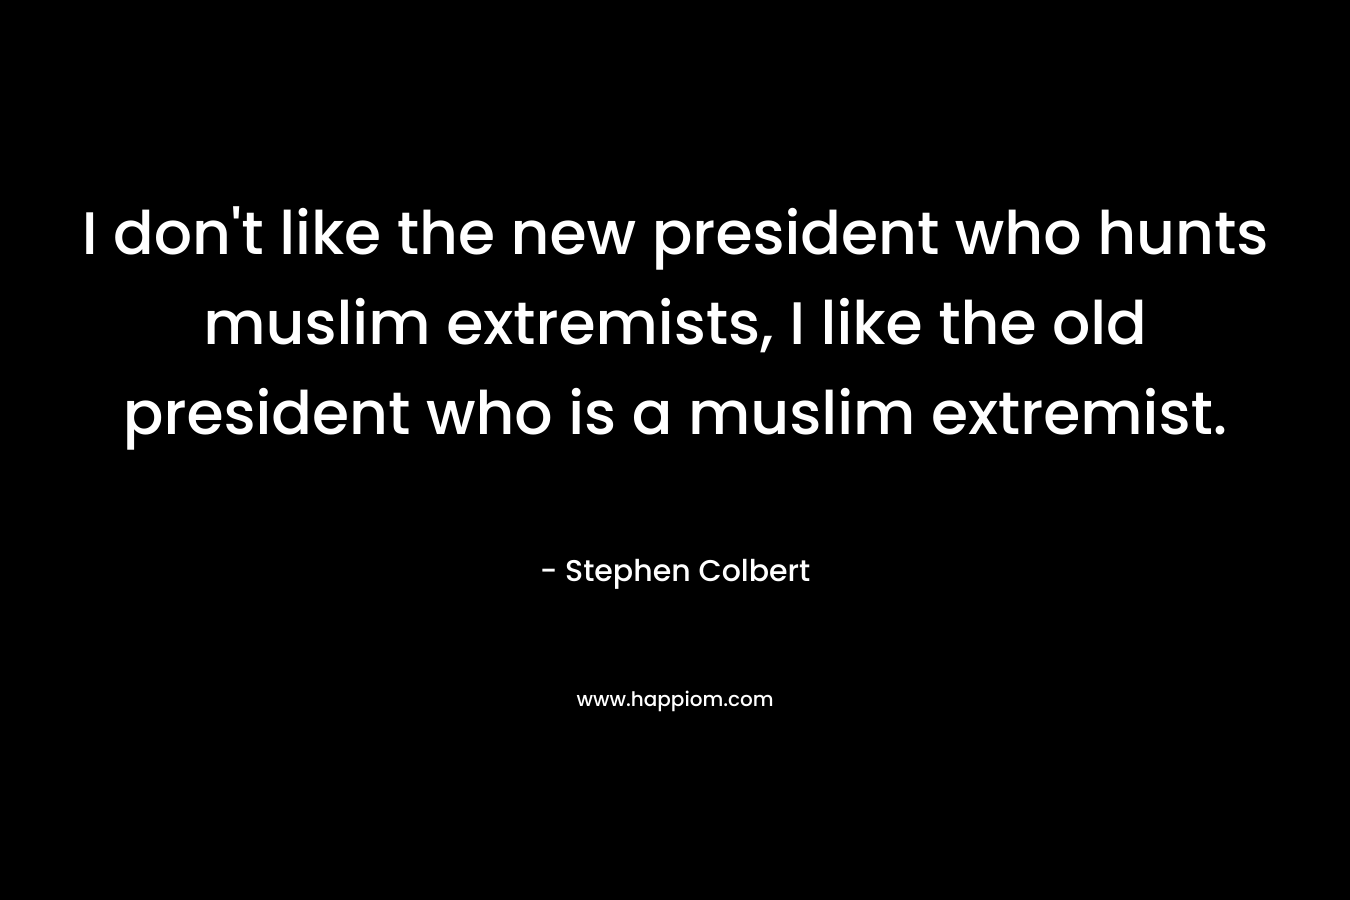 I don't like the new president who hunts muslim extremists, I like the old president who is a muslim extremist.